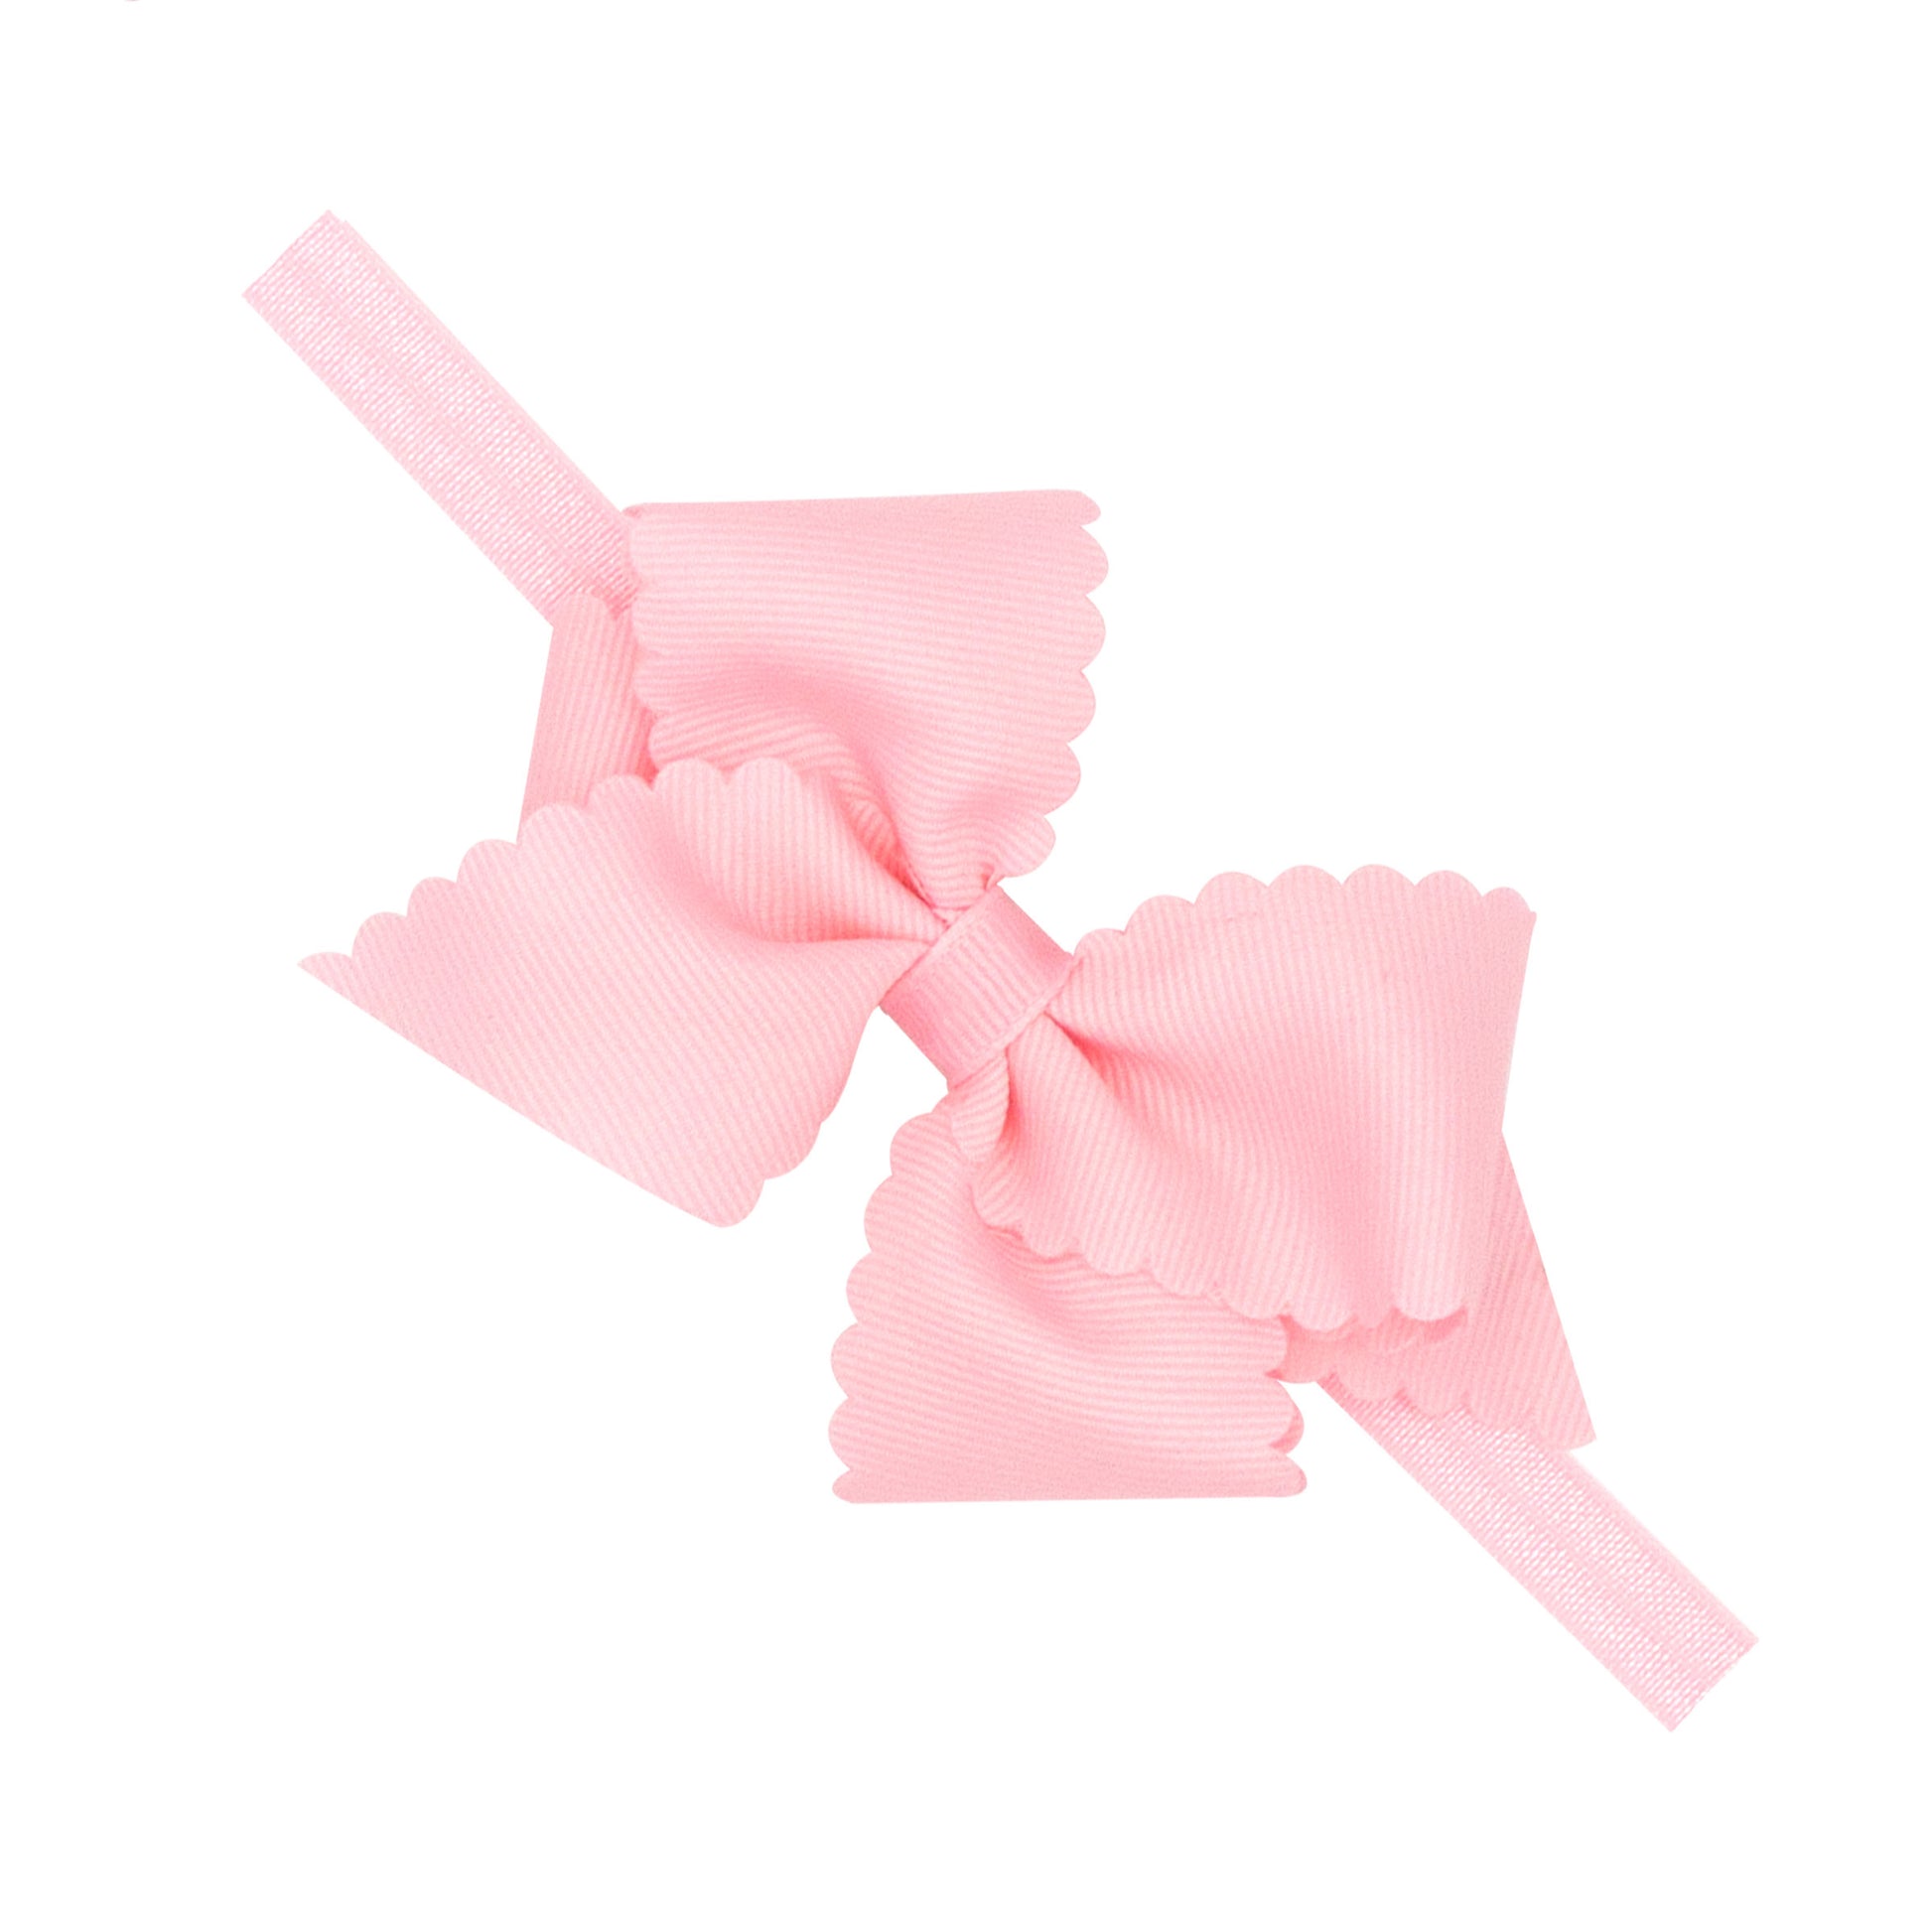 X-Small Scallop Grosgrain Bow on Band Kids Hair Accessories Wee Ones Light PInk 0-6m 